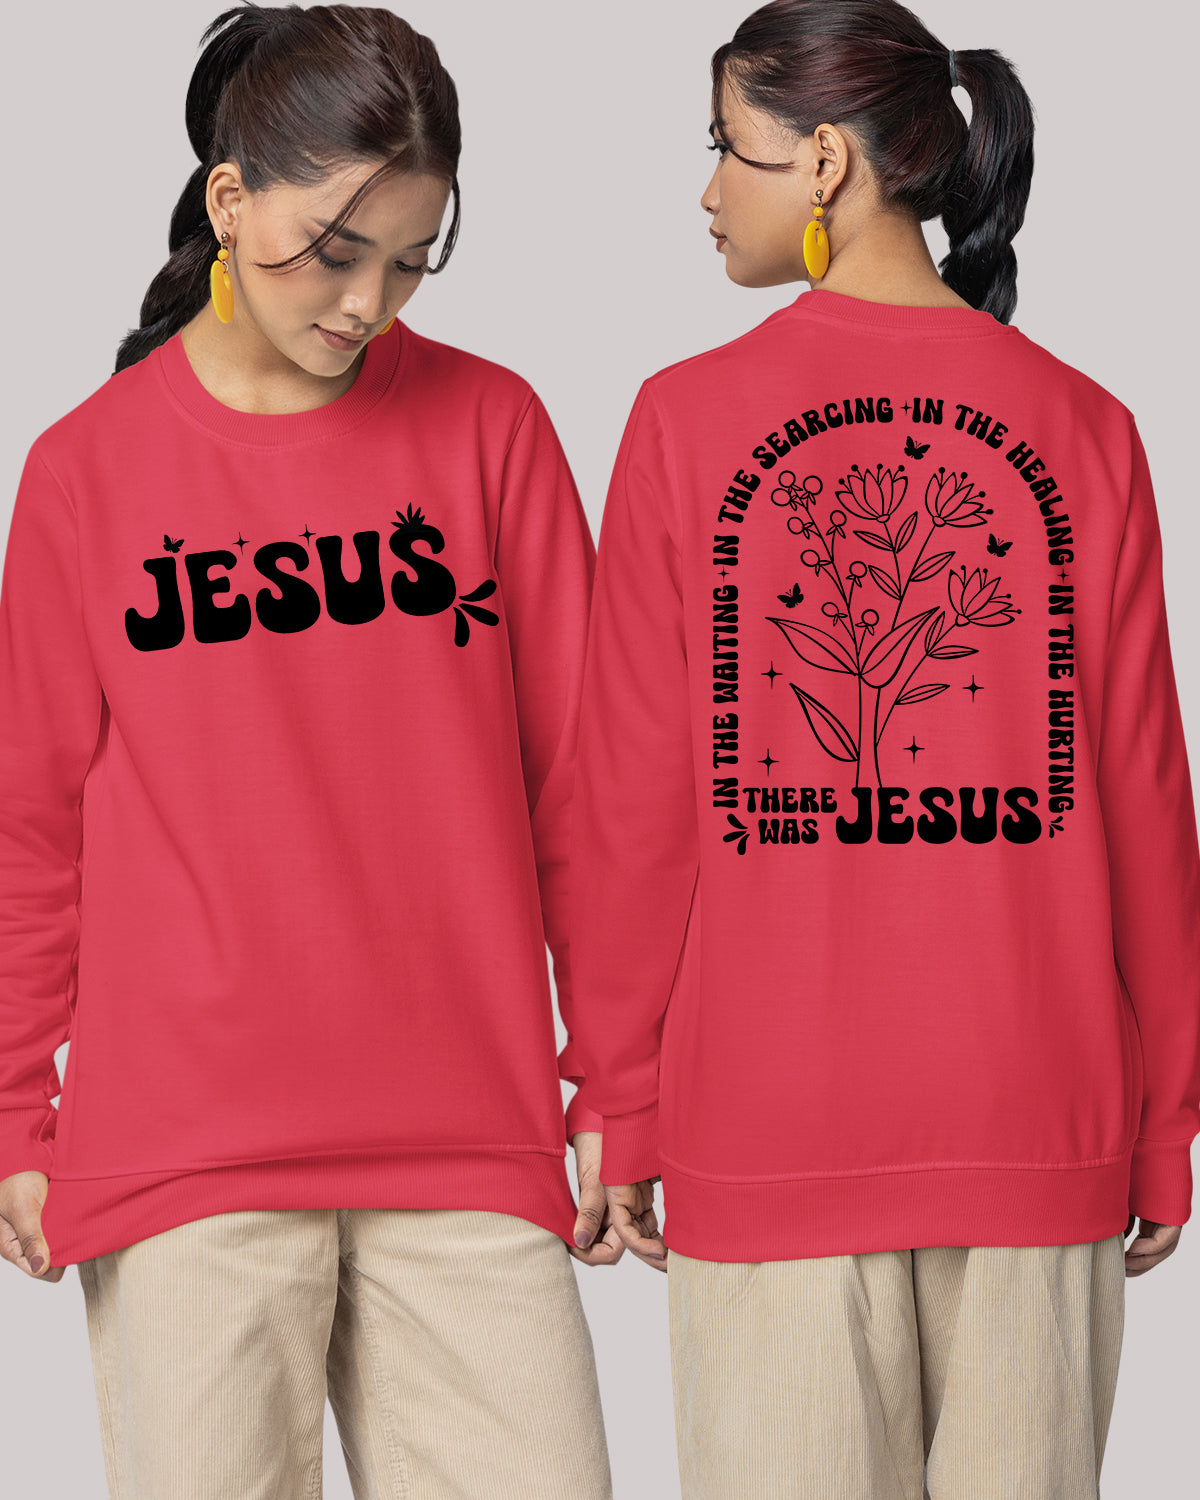 In The Waiting I The Searching In The Healing In The Hurting There Was Jesus Boho Christian Front Back Sweatshirt